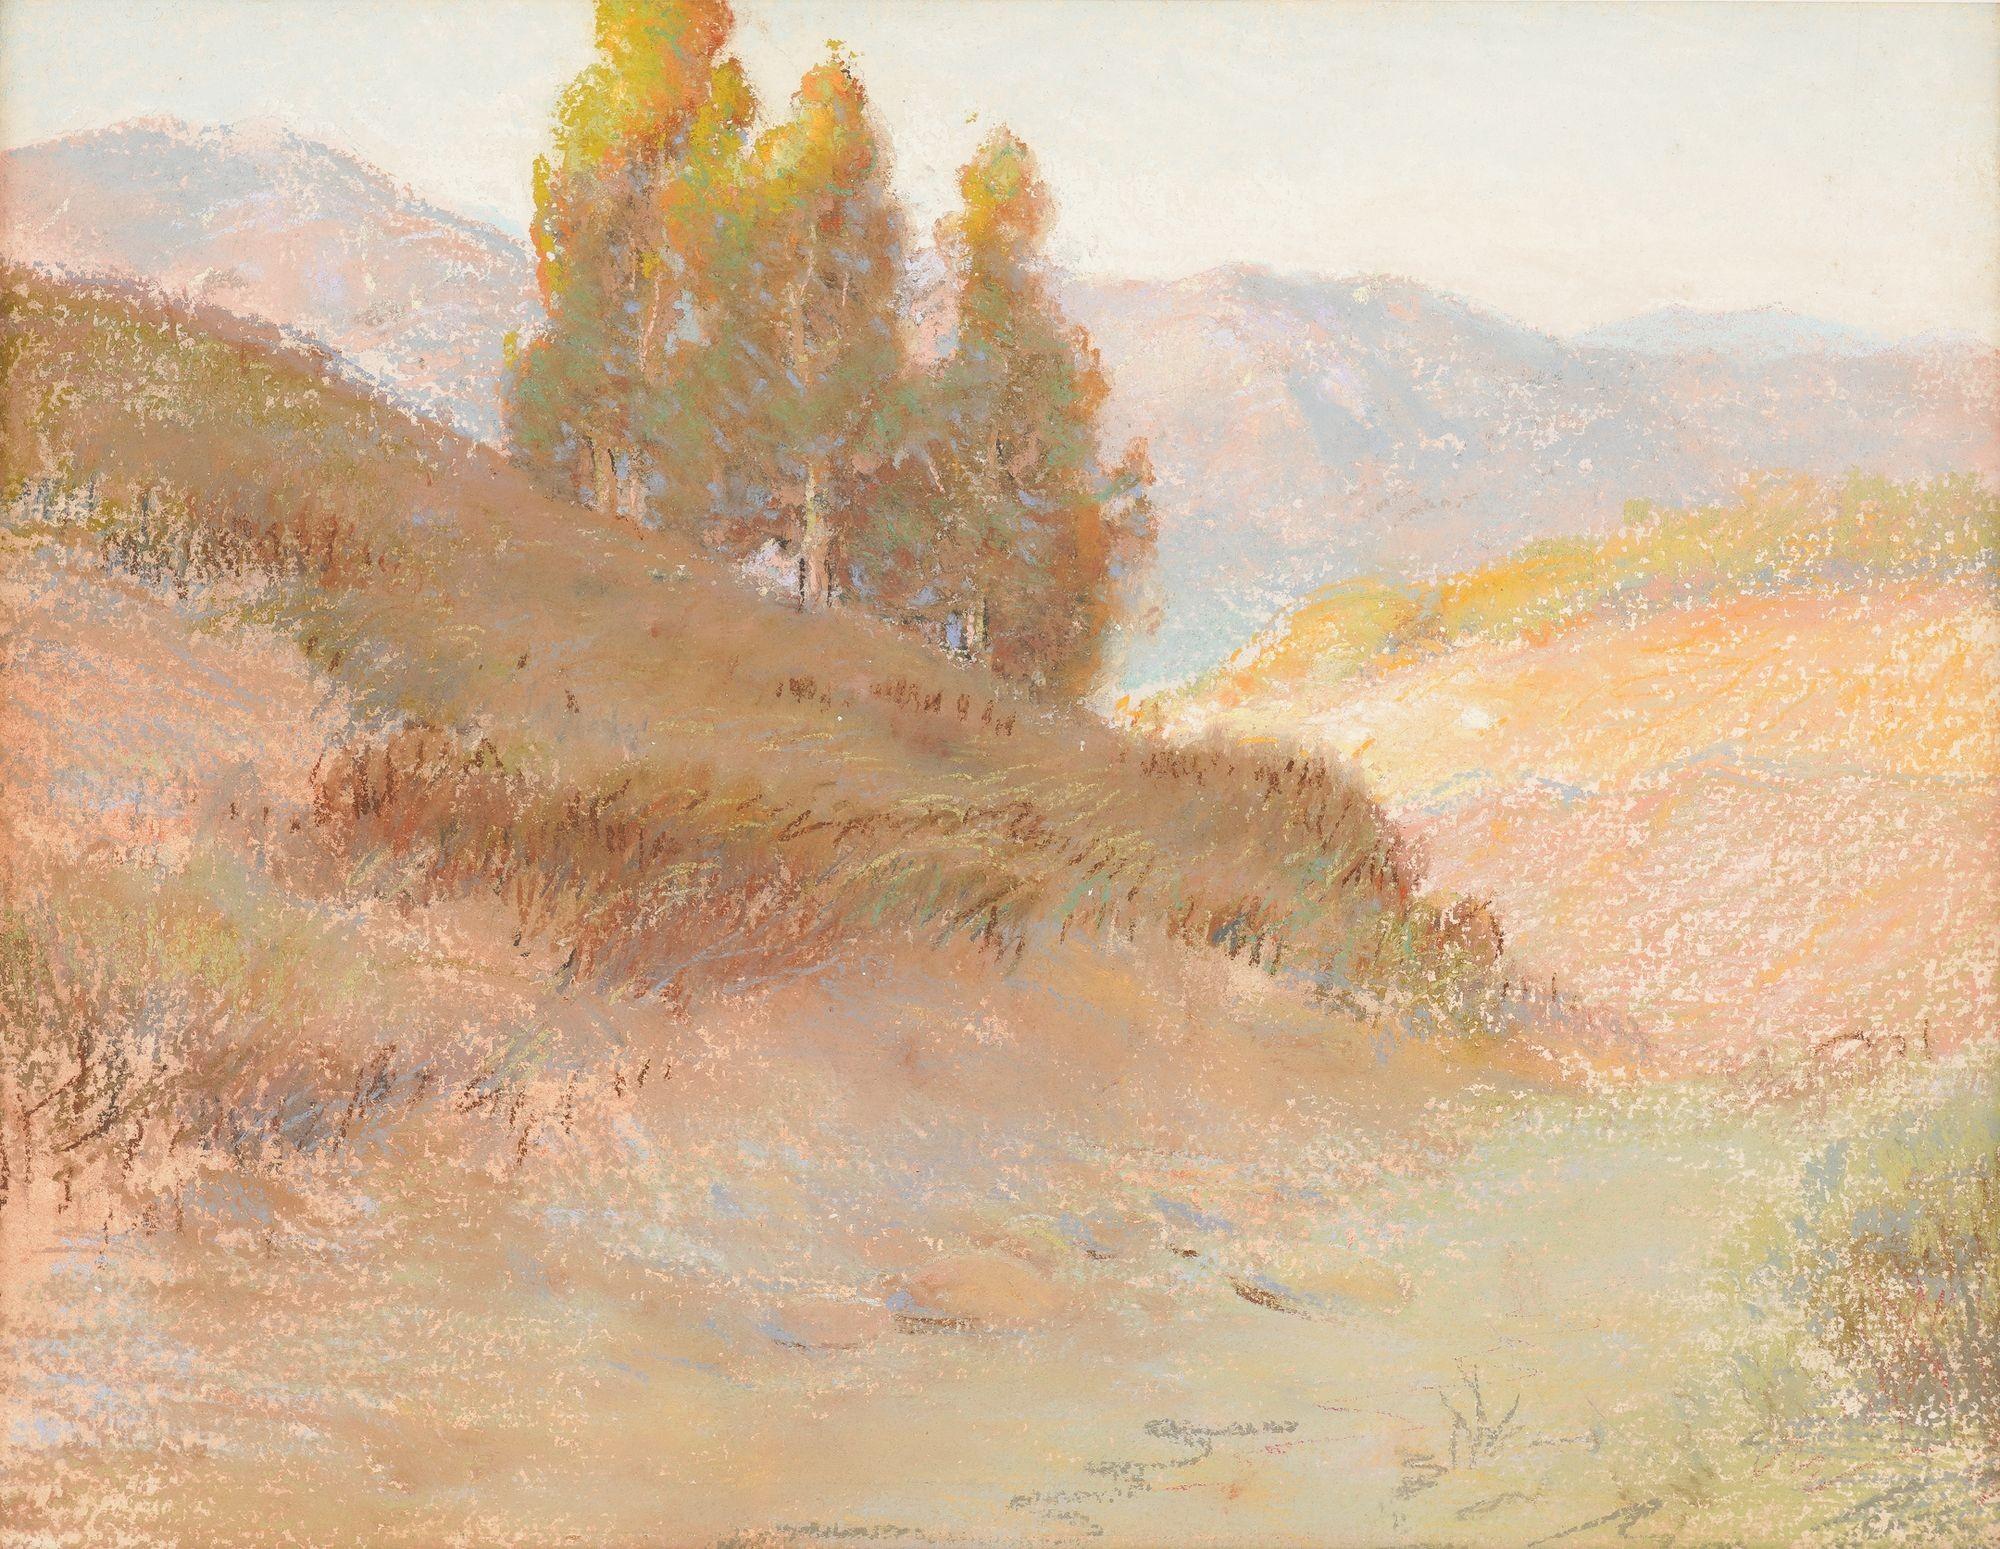 Unsigned California plein aire school pastel on paper landscape study. The work is framed in a white gold leafed molding on archival mat, and mounted under UV filtering museum glass.

American, circa 1910-20.